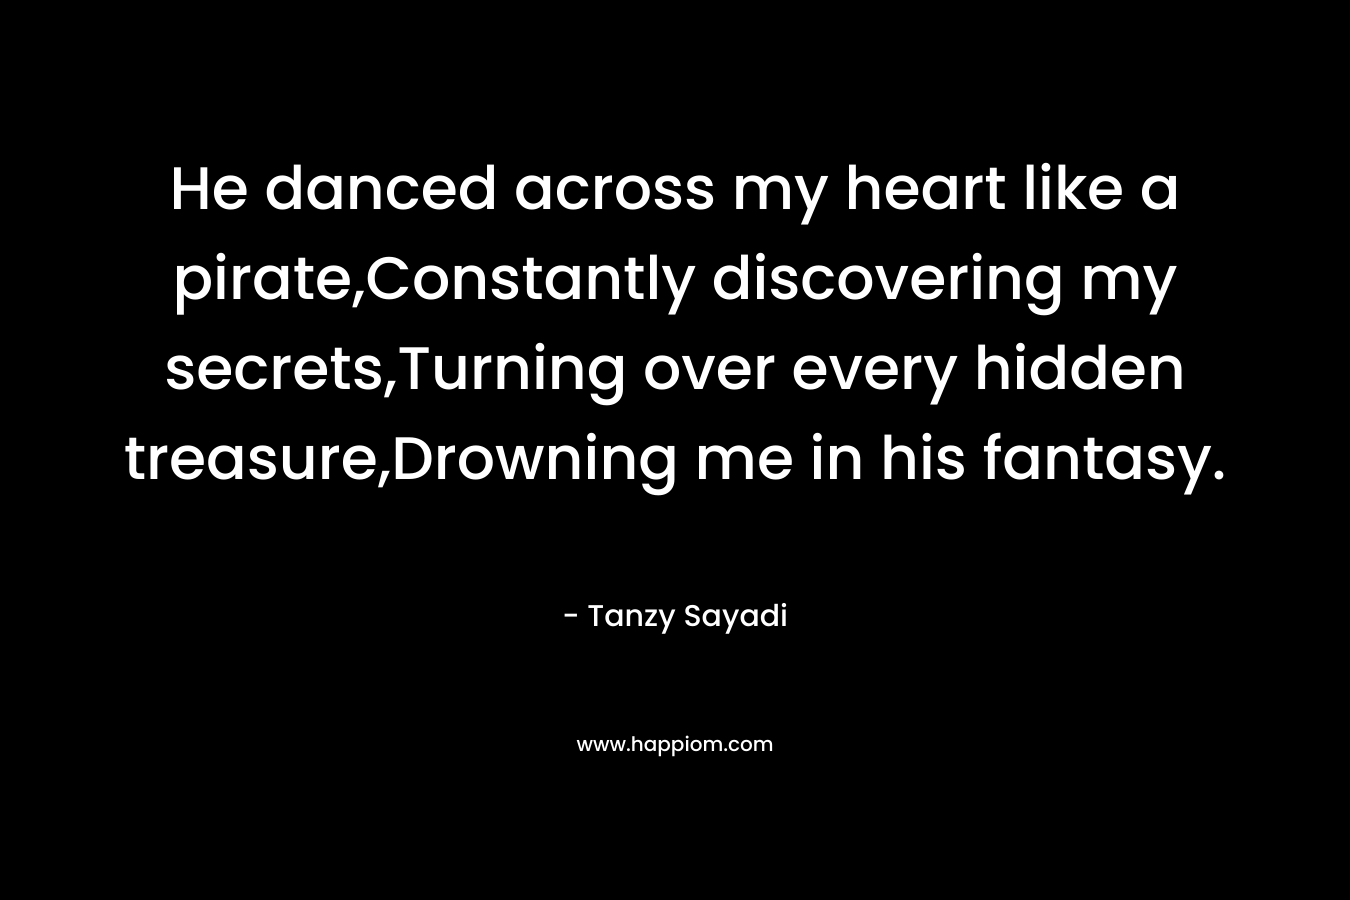 He danced across my heart like a pirate,Constantly discovering my secrets,Turning over every hidden treasure,Drowning me in his fantasy. – Tanzy Sayadi